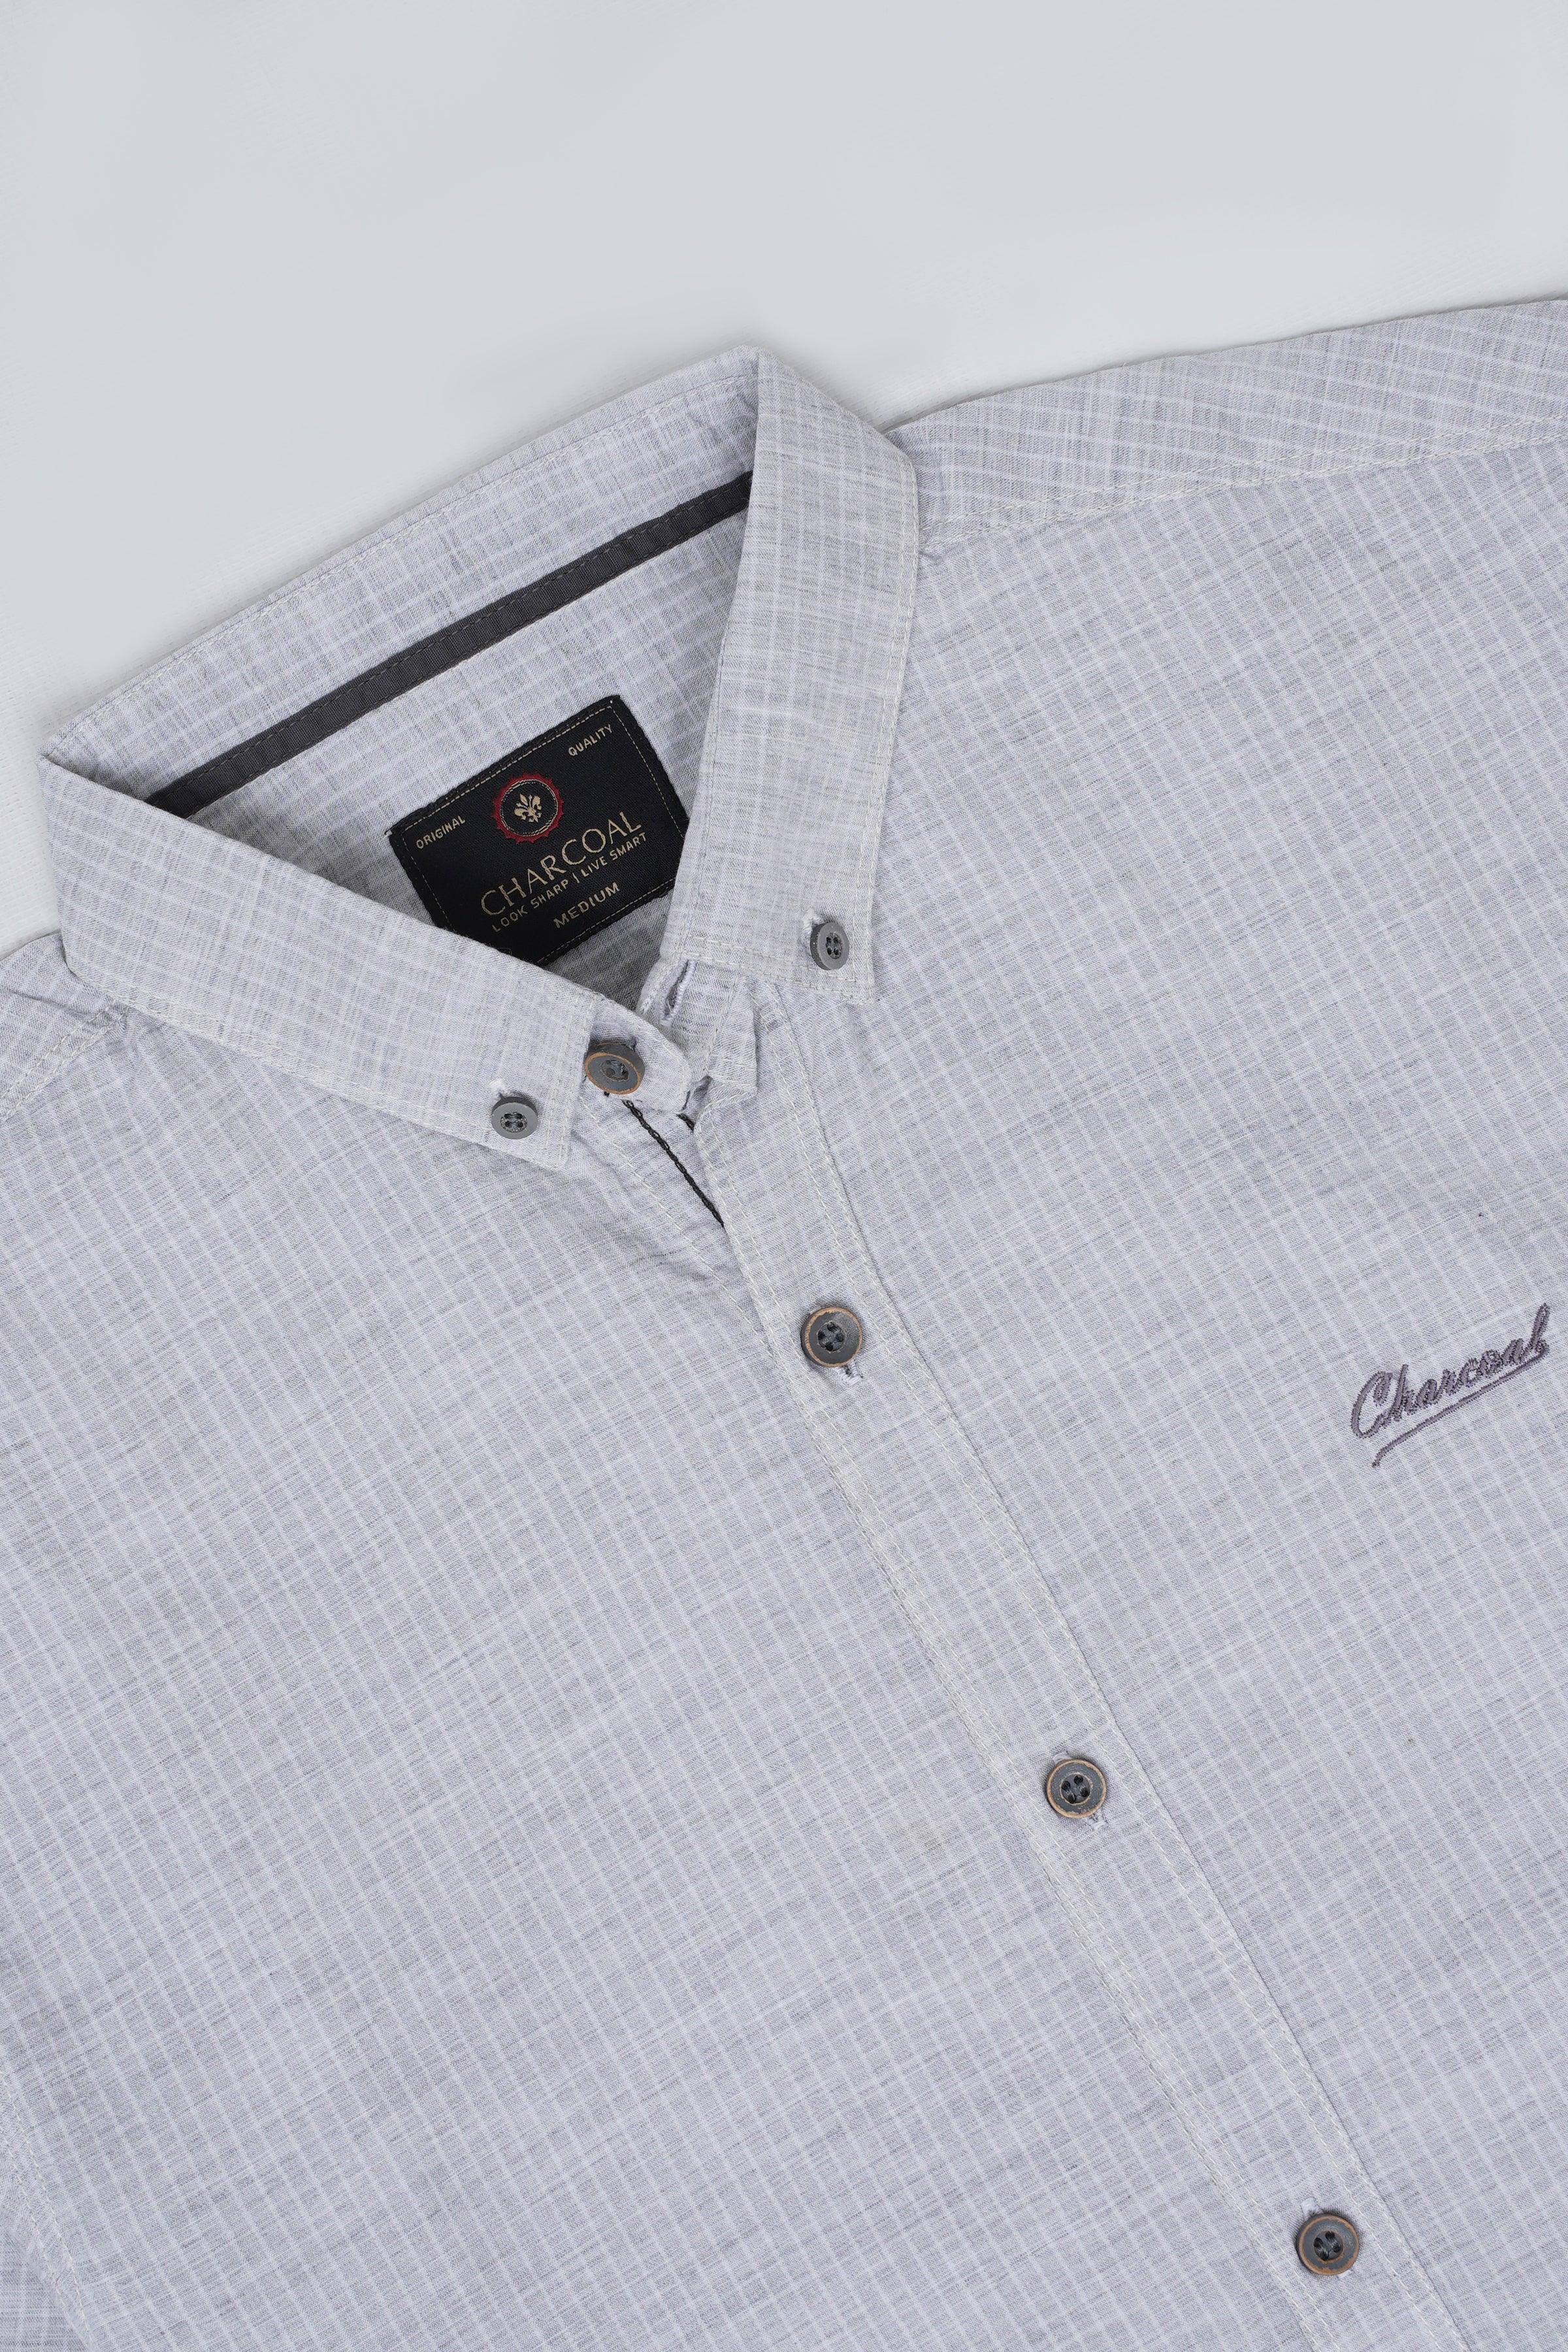 CASUAL SHIRT GREY WHITE LINE at Charcoal Clothing